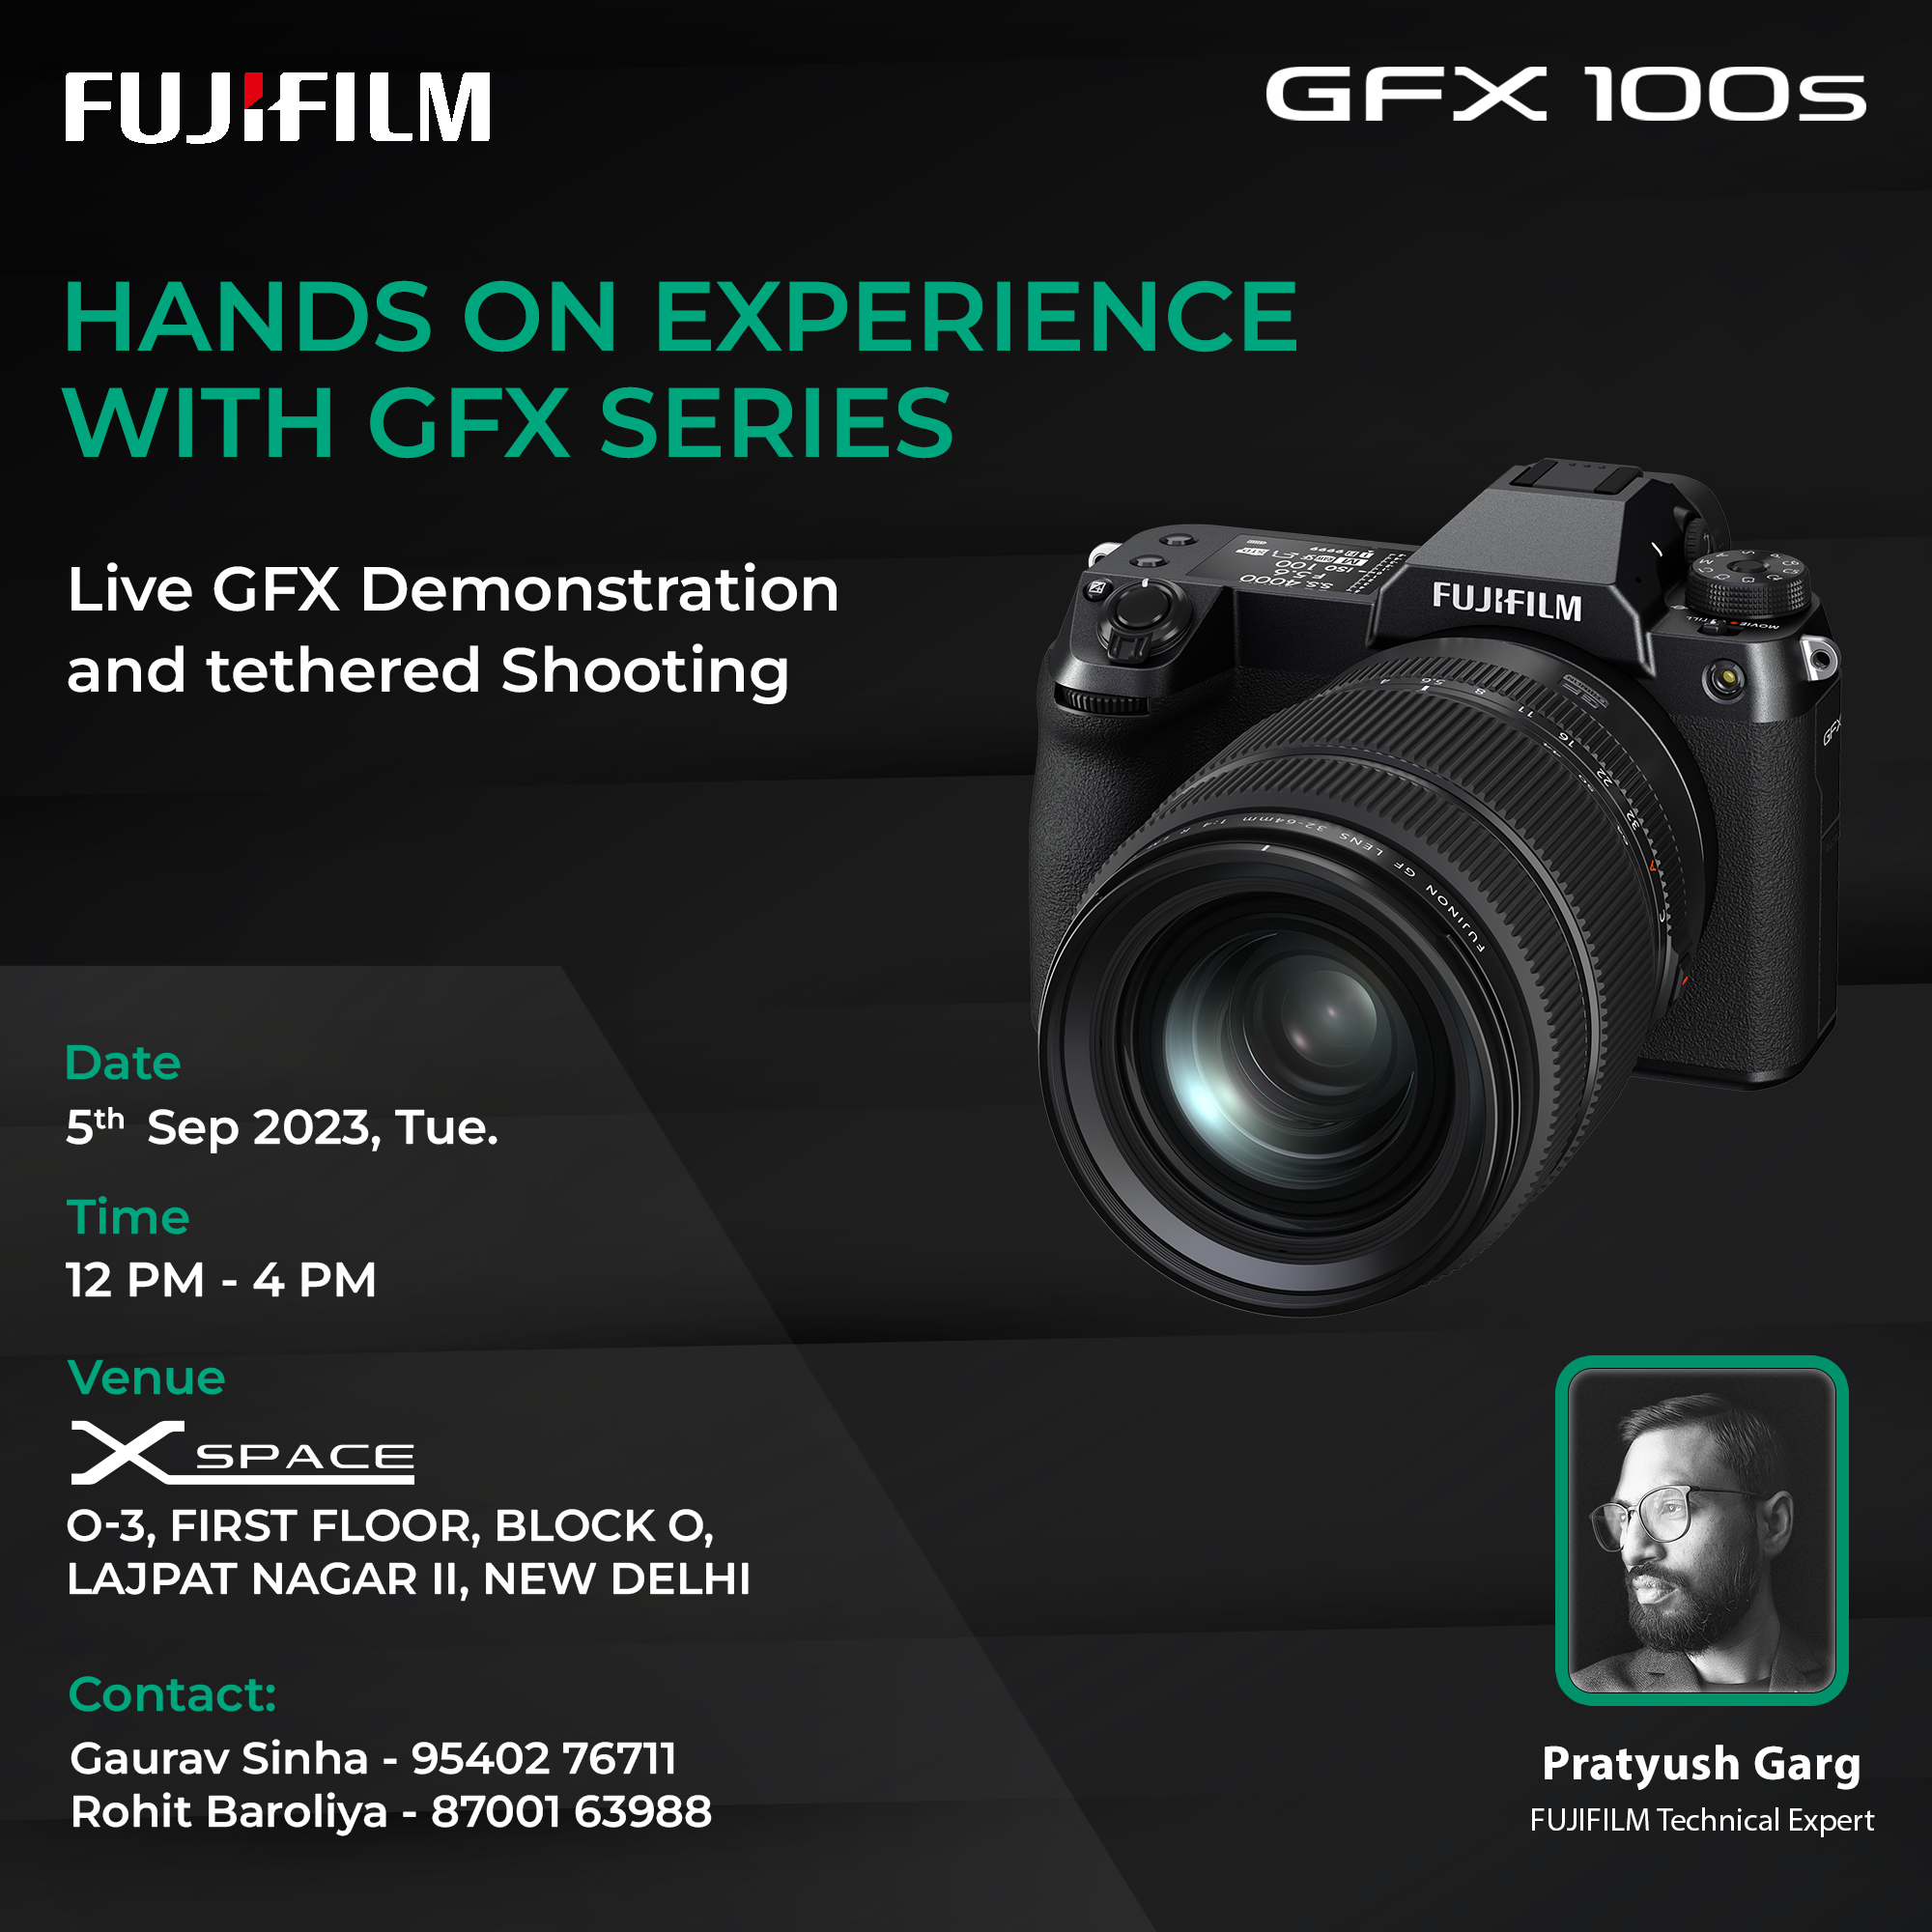 Hands on Experience with GFX Series